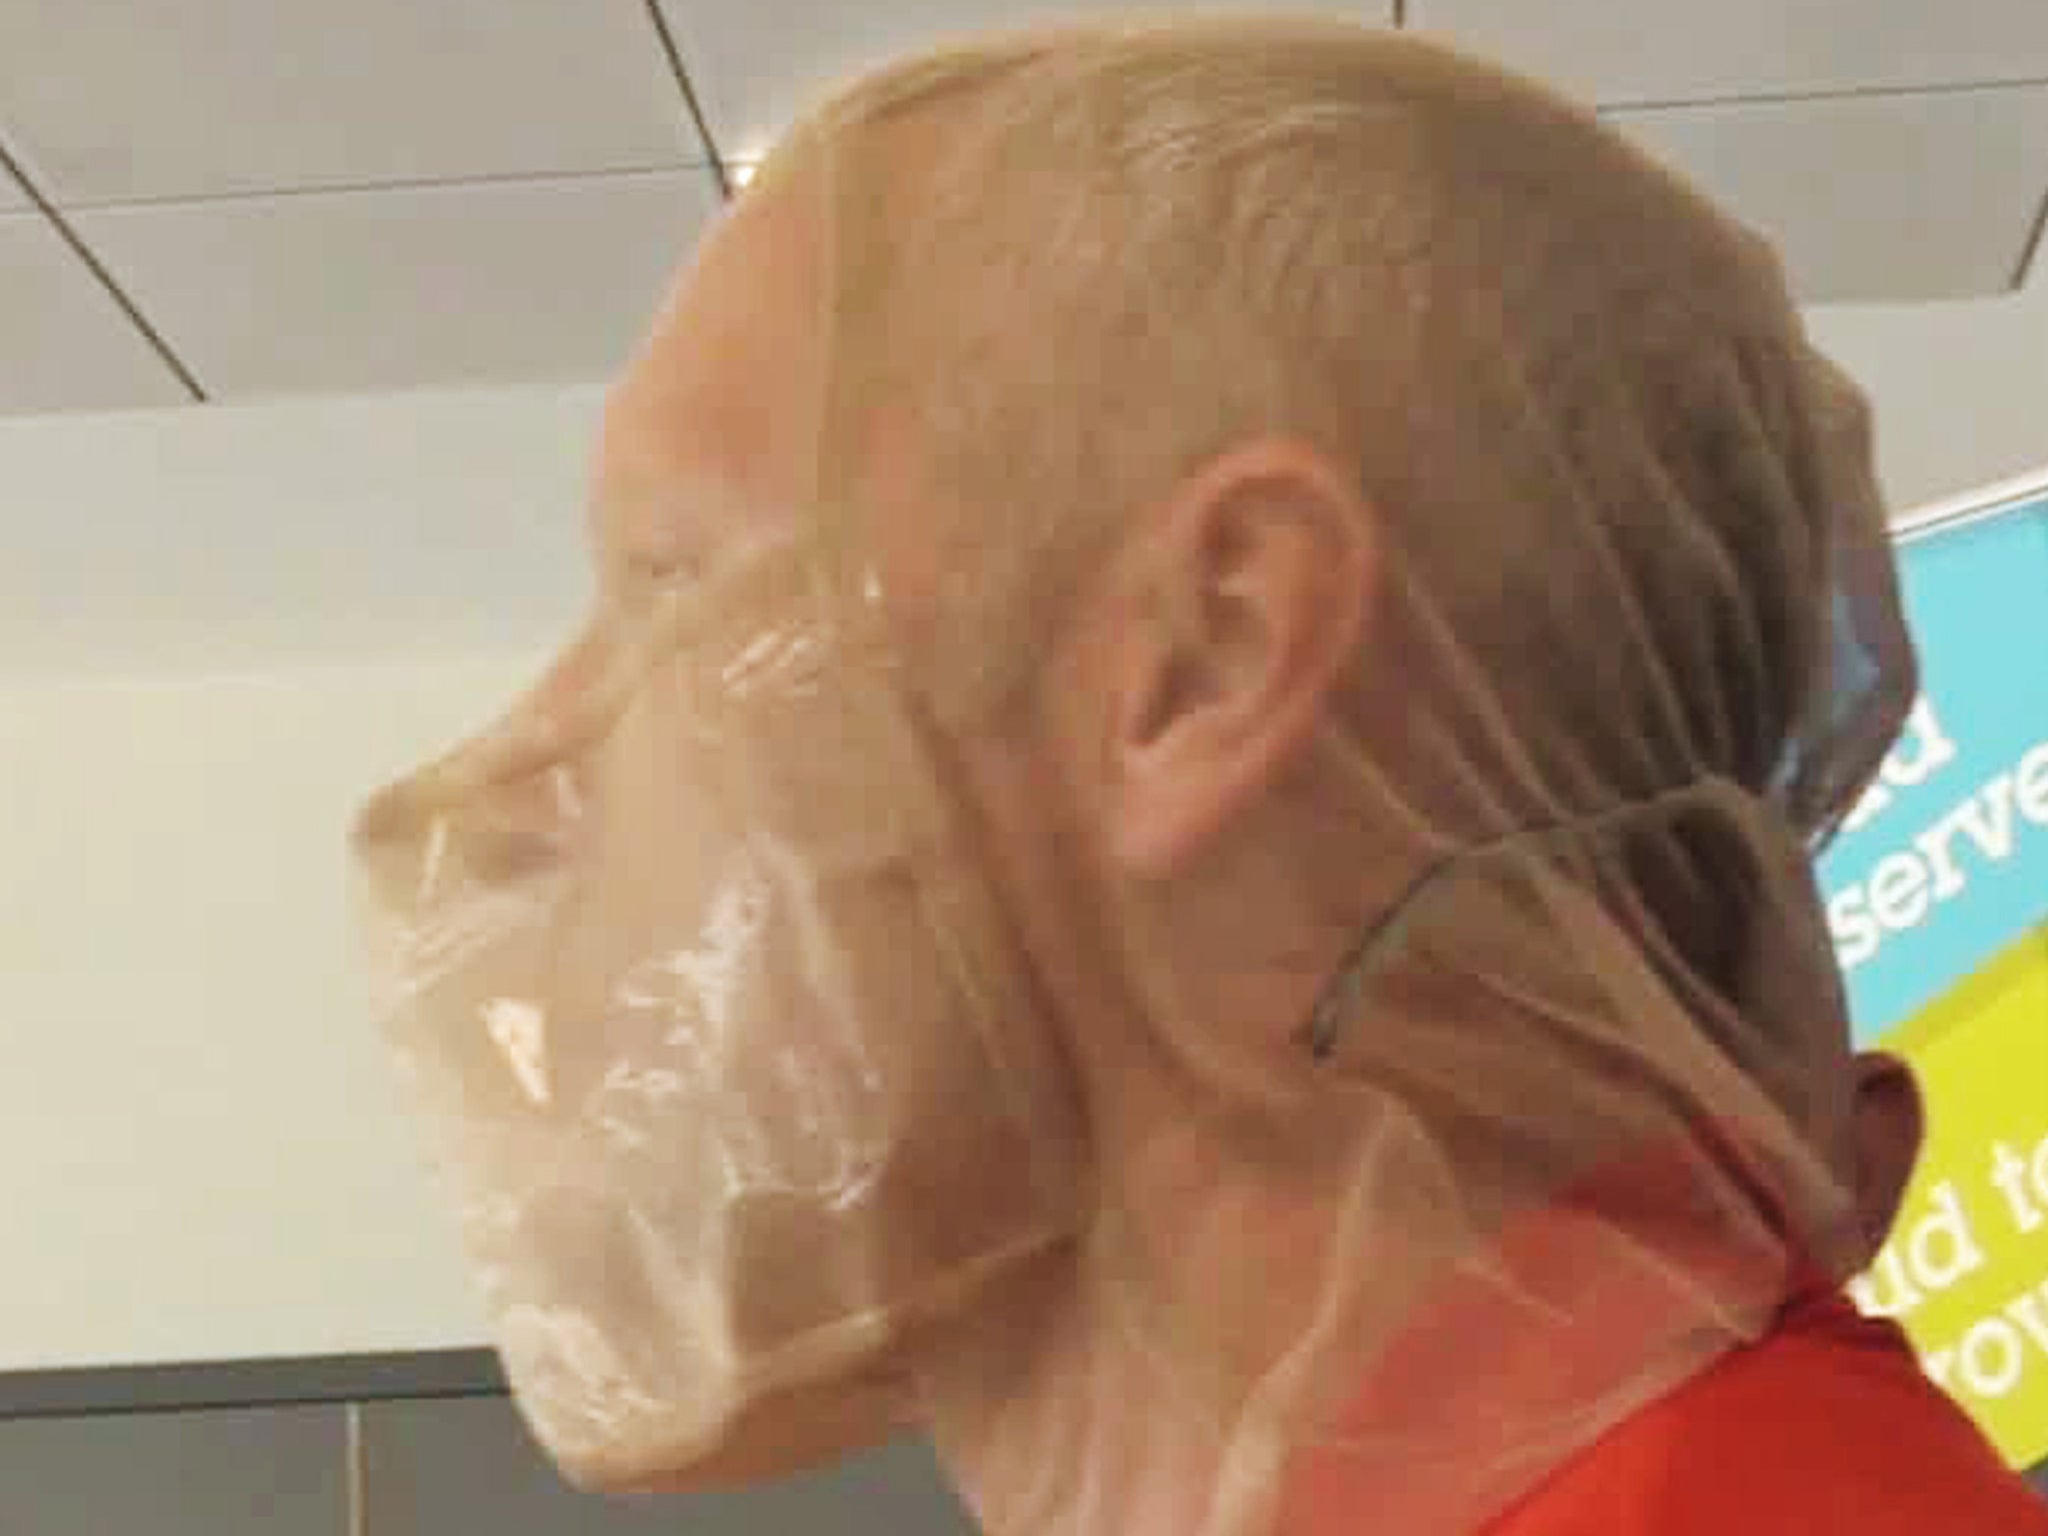 Spit hoods are used to prevent prisoners from biting or spitting on officers